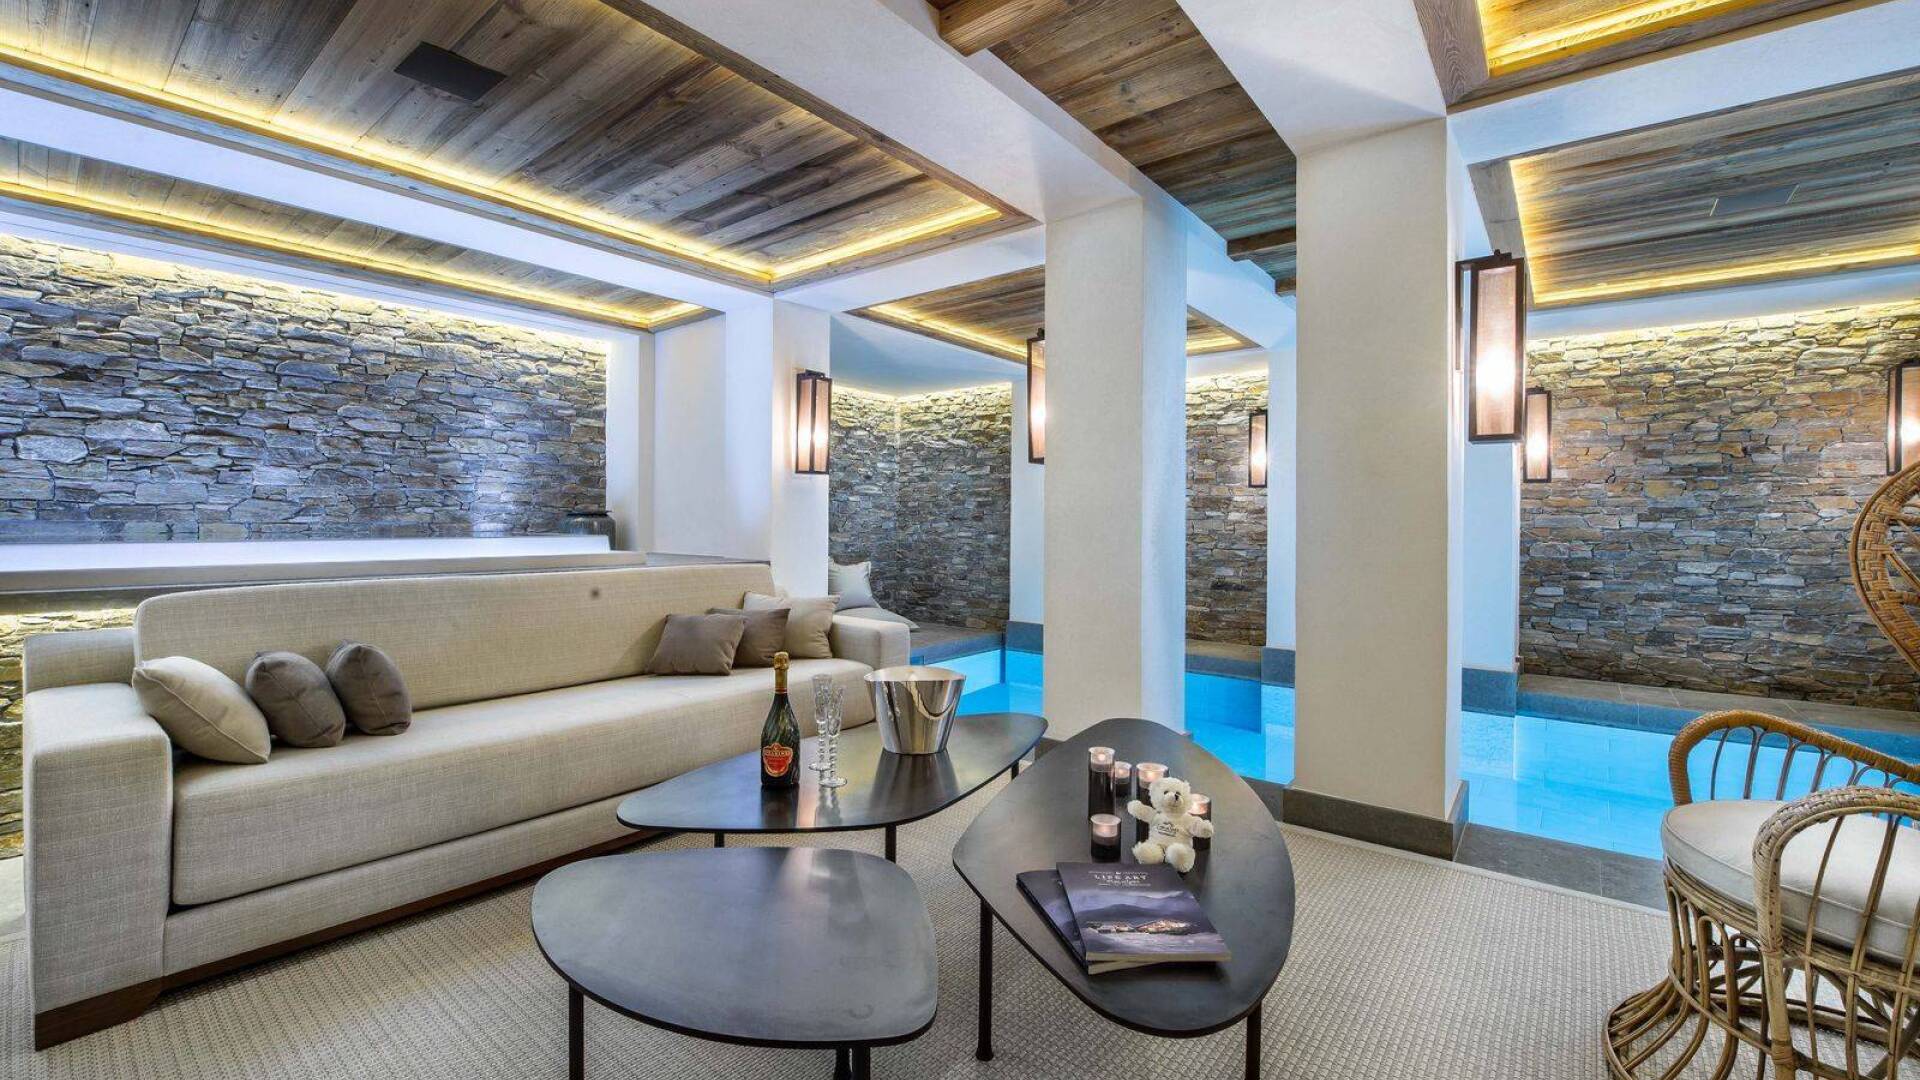 luxury Chalet Thuya for weekly rentals in Courchevel, French Alps